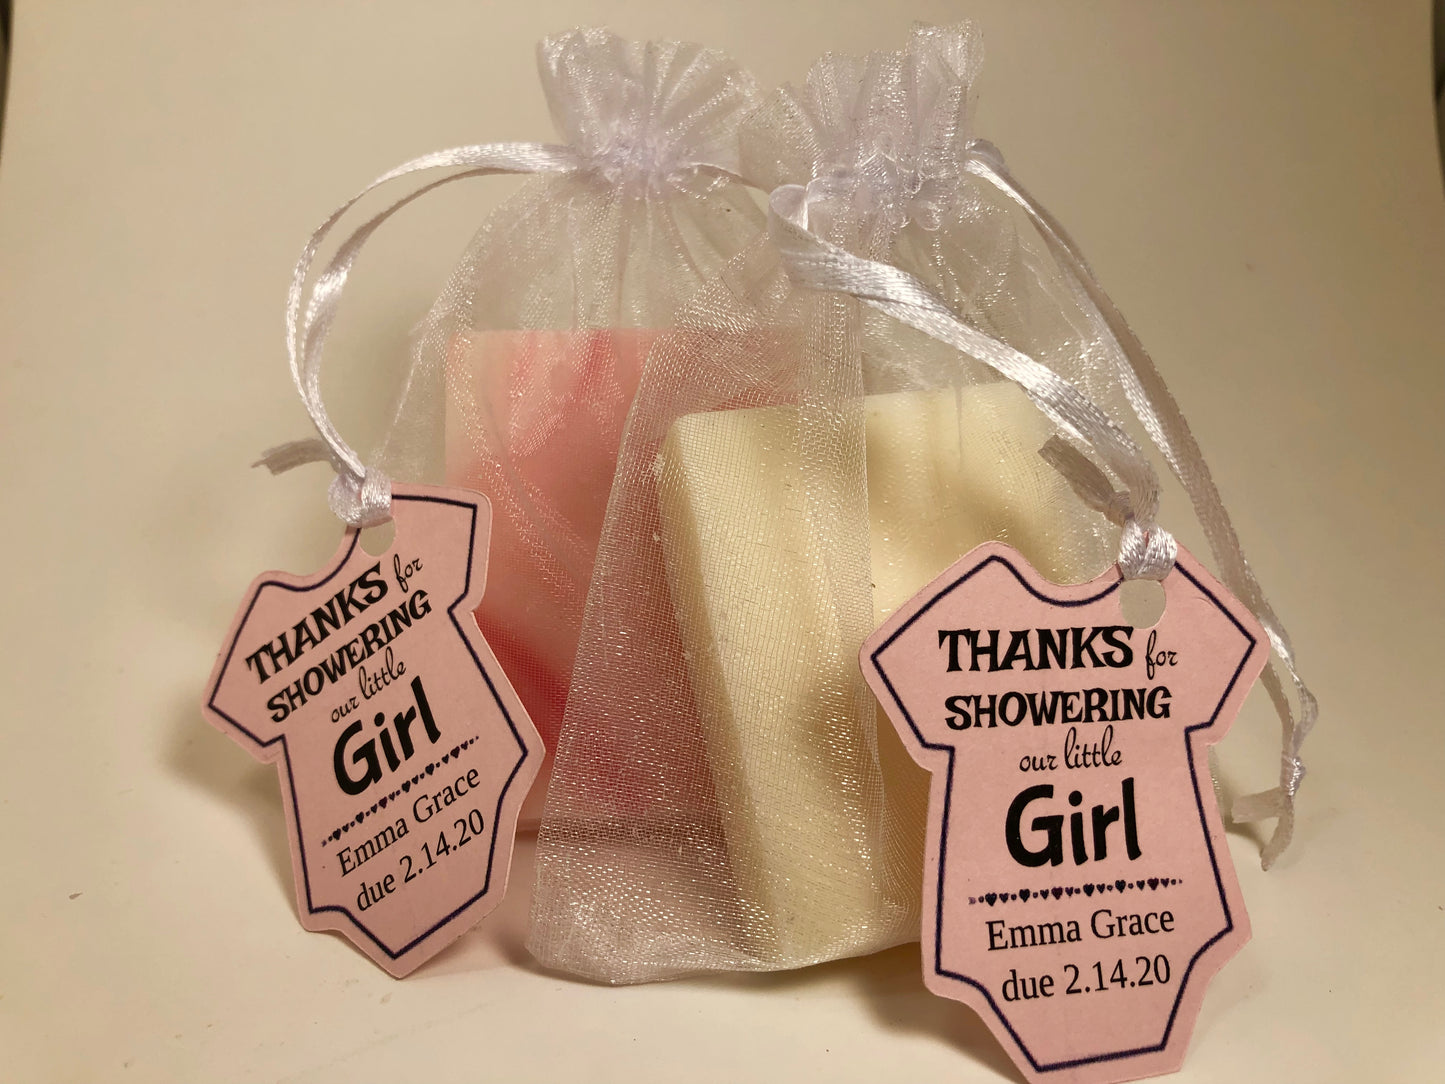 Mini soap shower favors in mesh bags with custom baby onesie tags